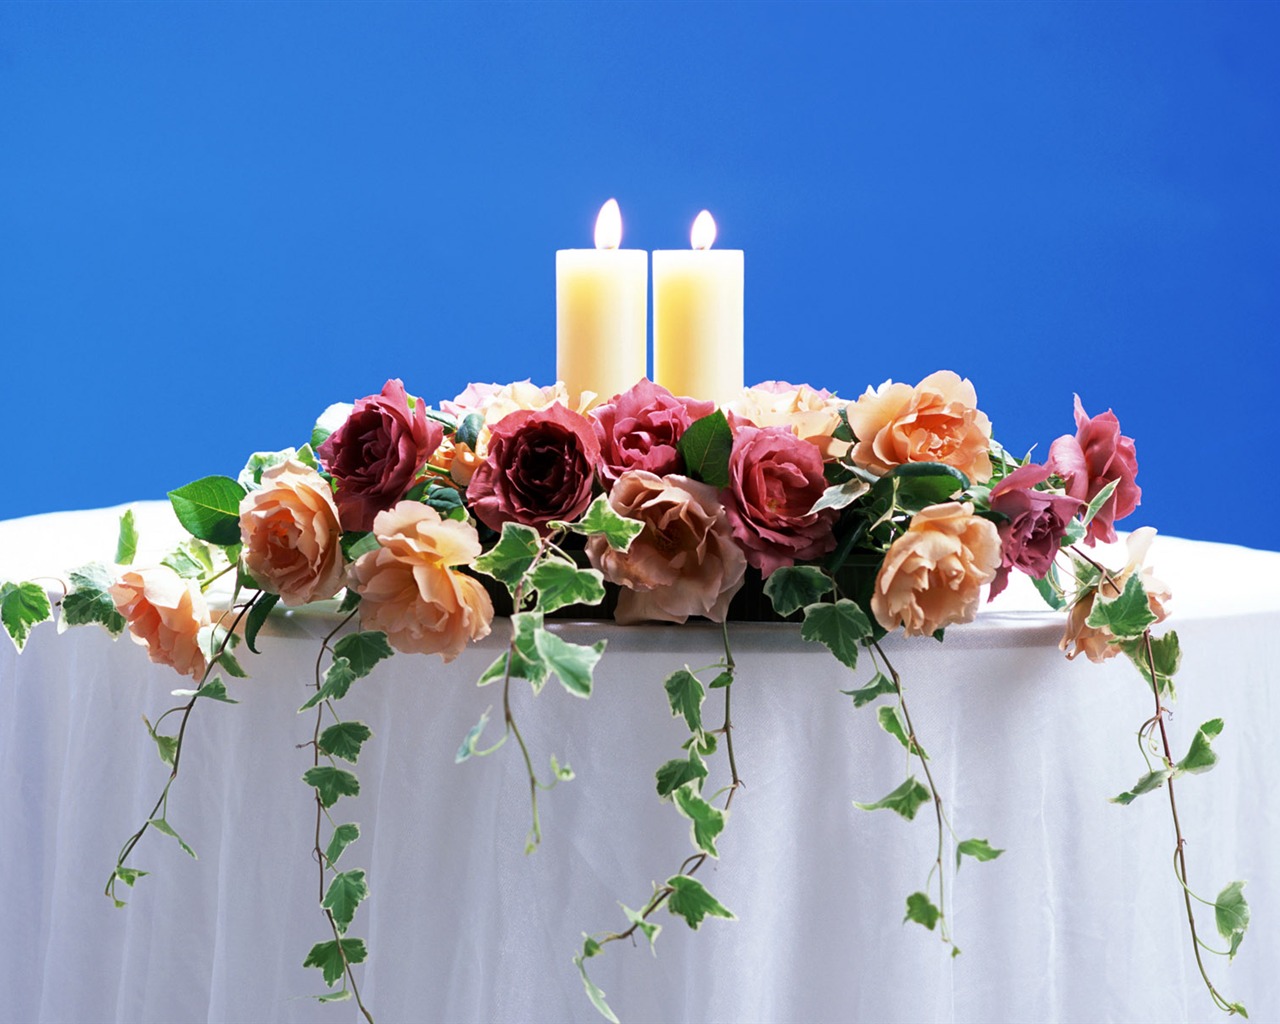 Weddings and Flowers wallpaper (2) #13 - 1280x1024